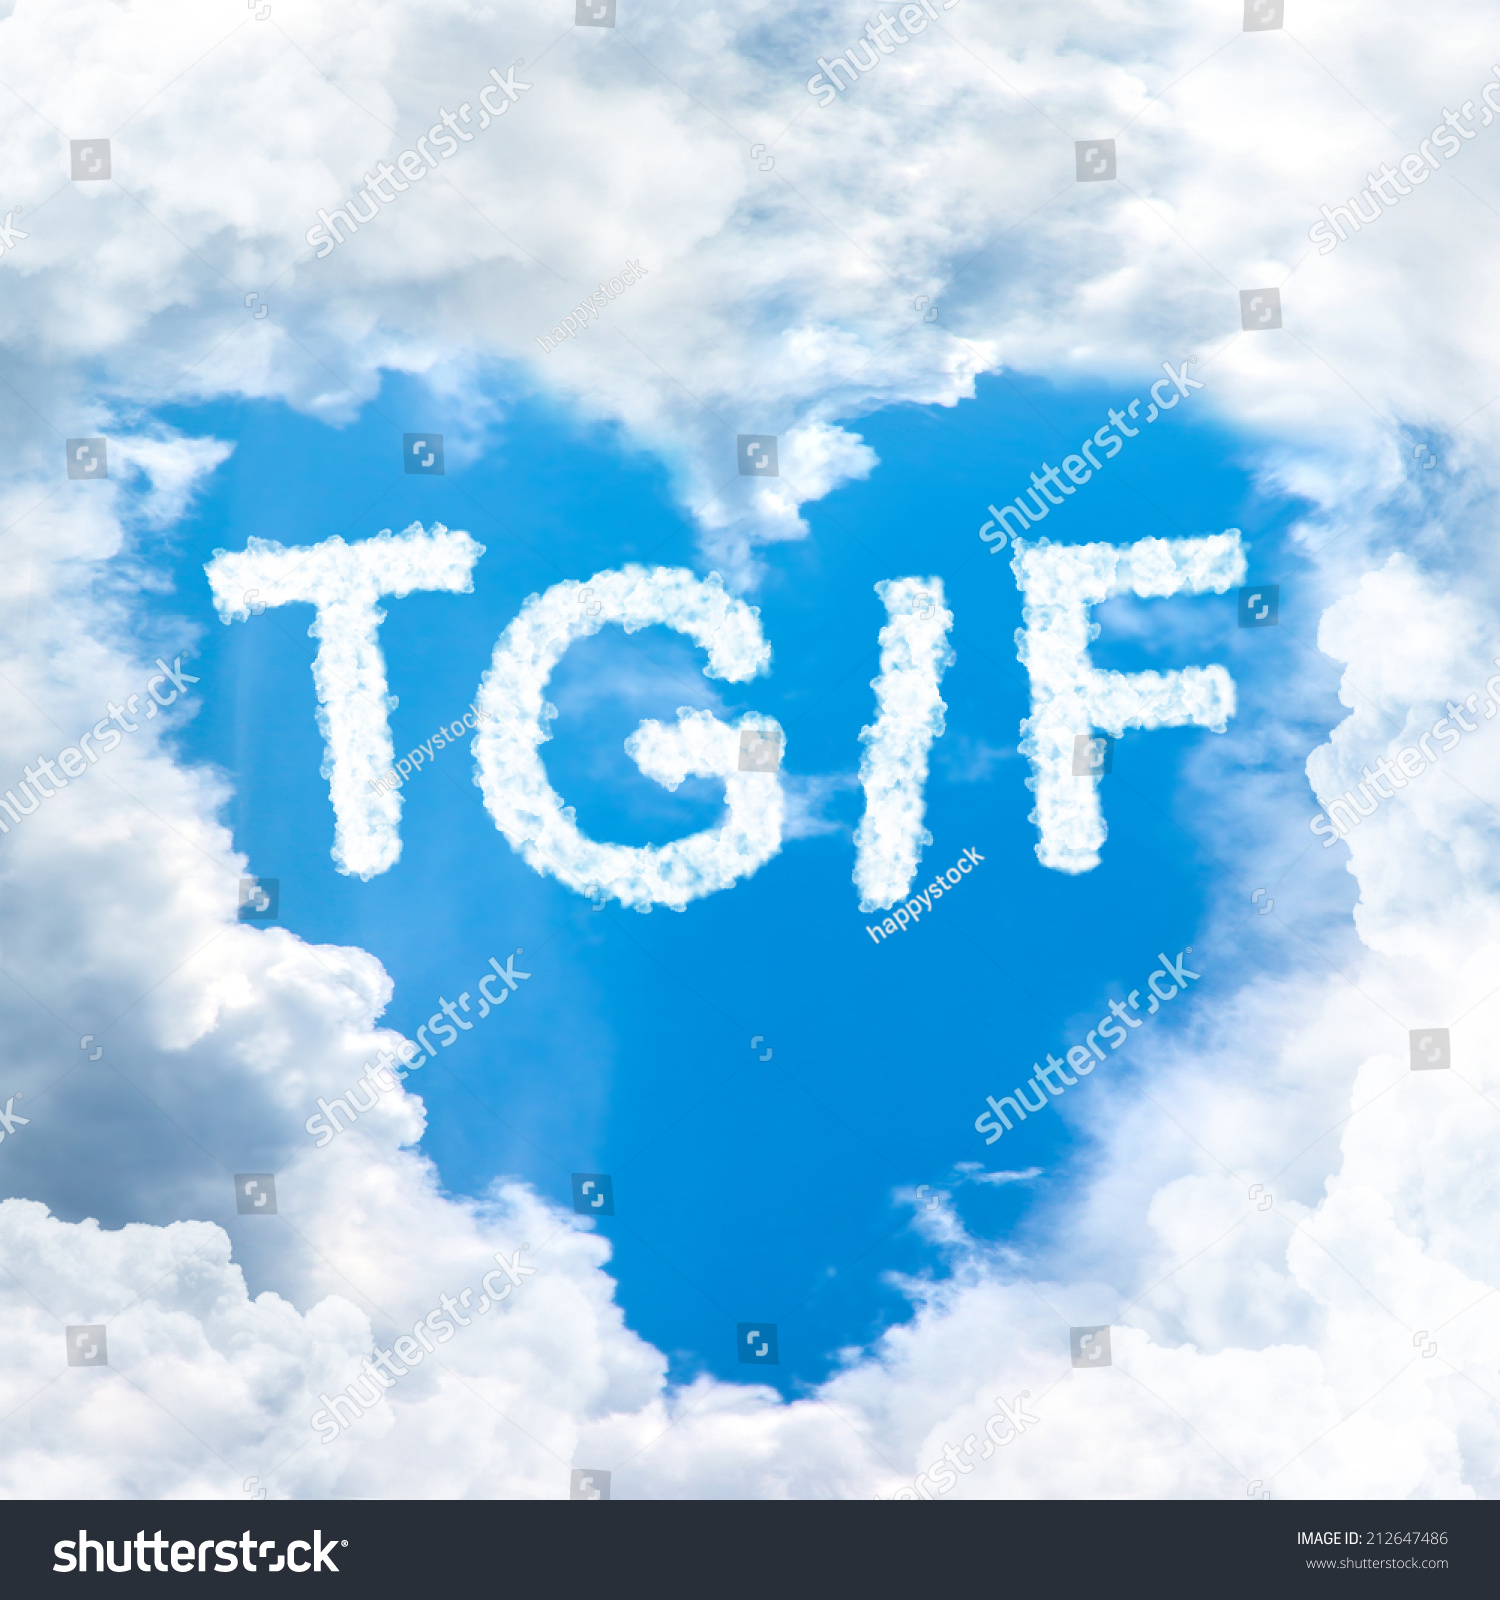 TGIF concept friday time happy for holiday inside blue sky shape heart from cloud frame #212647486